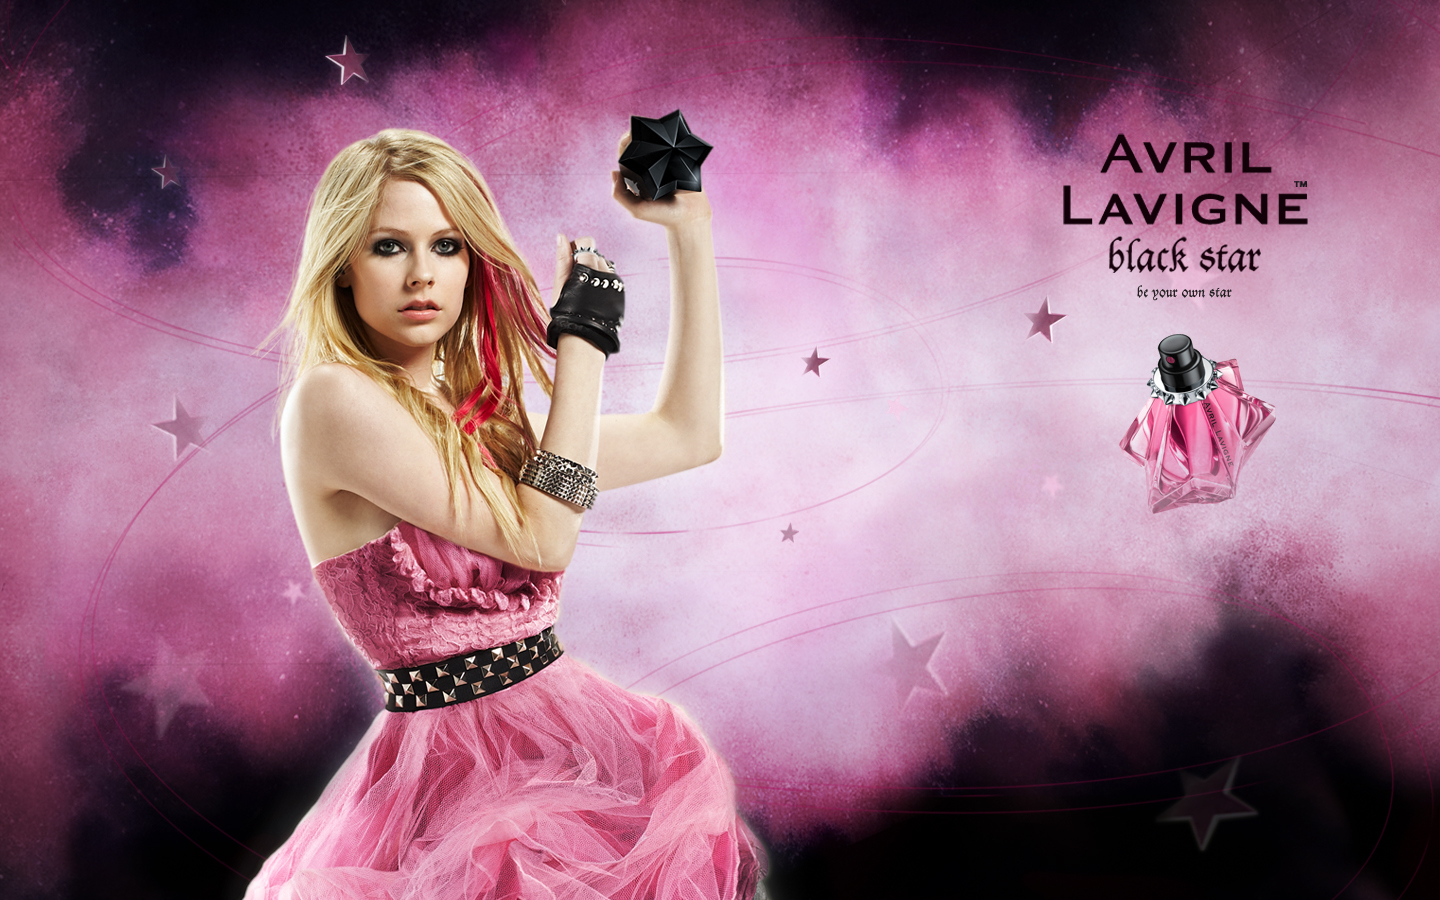 of Black Star from Avril